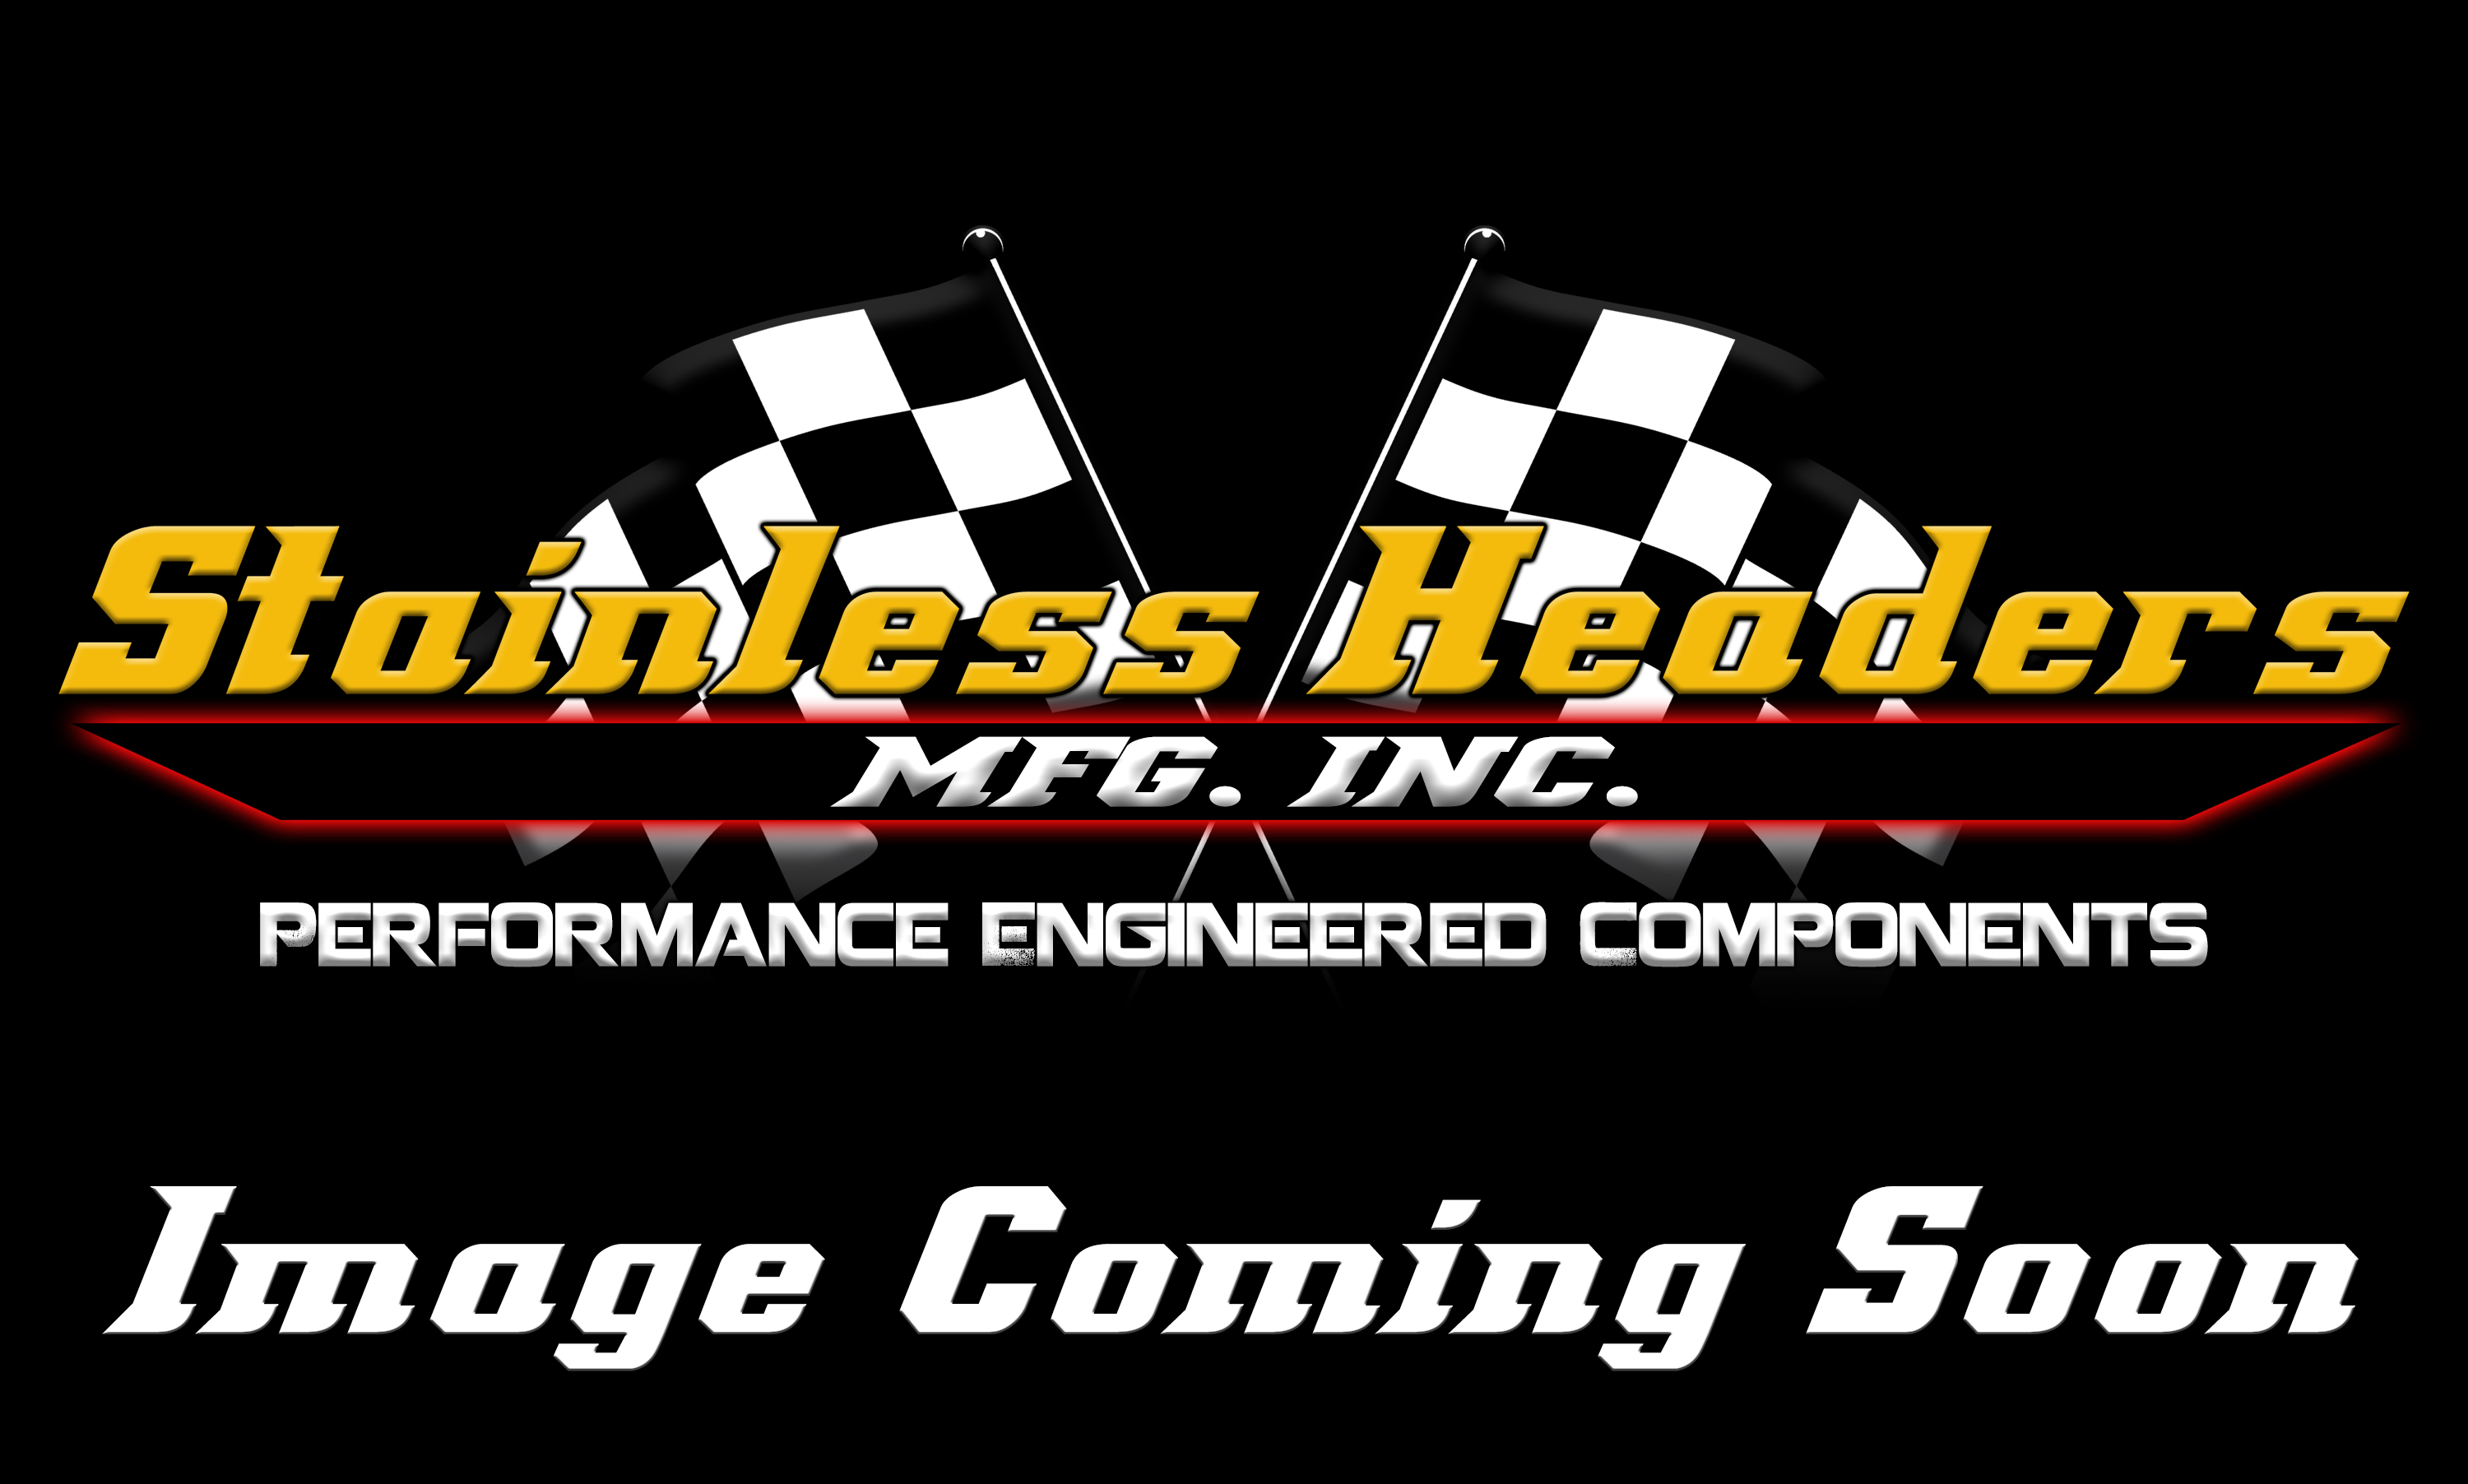 Stainless Headers - 1 3/4" Primary 8 into 1 Performance Merge Collector-16ga 321ss - Image 1